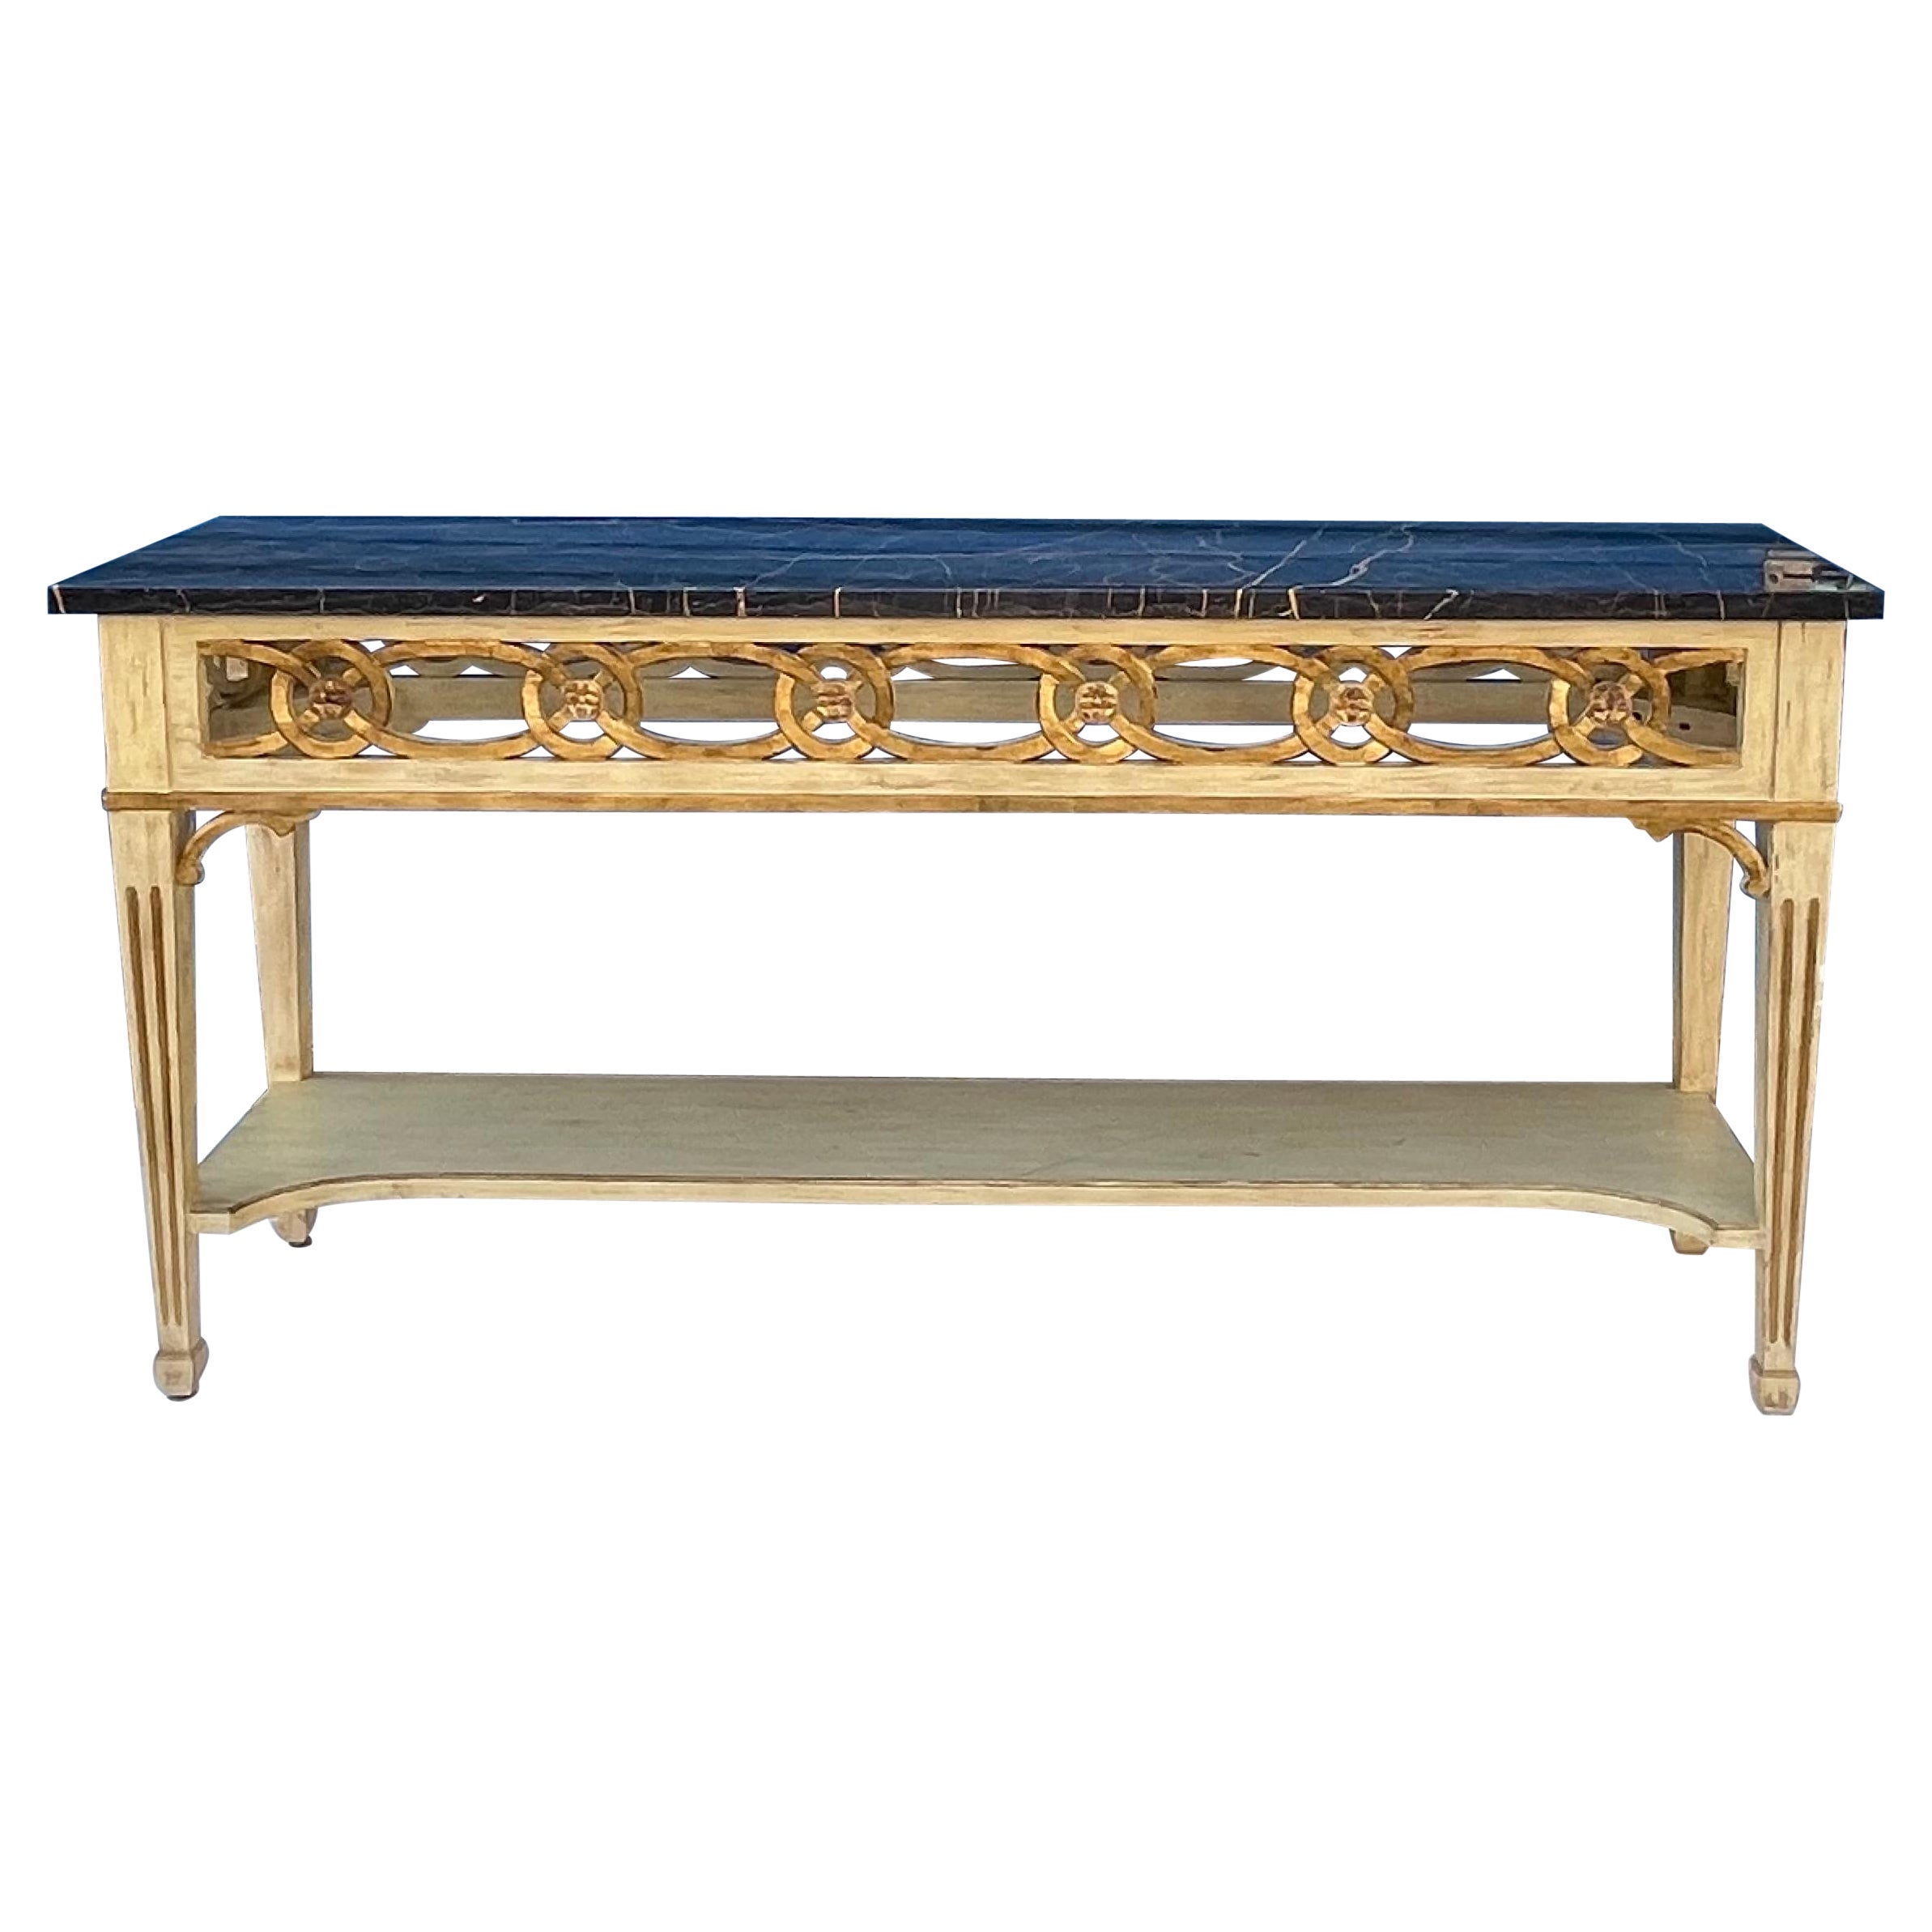 Neoclassical Italian Neo-Classical Style Giltwood Marble Top Console Table